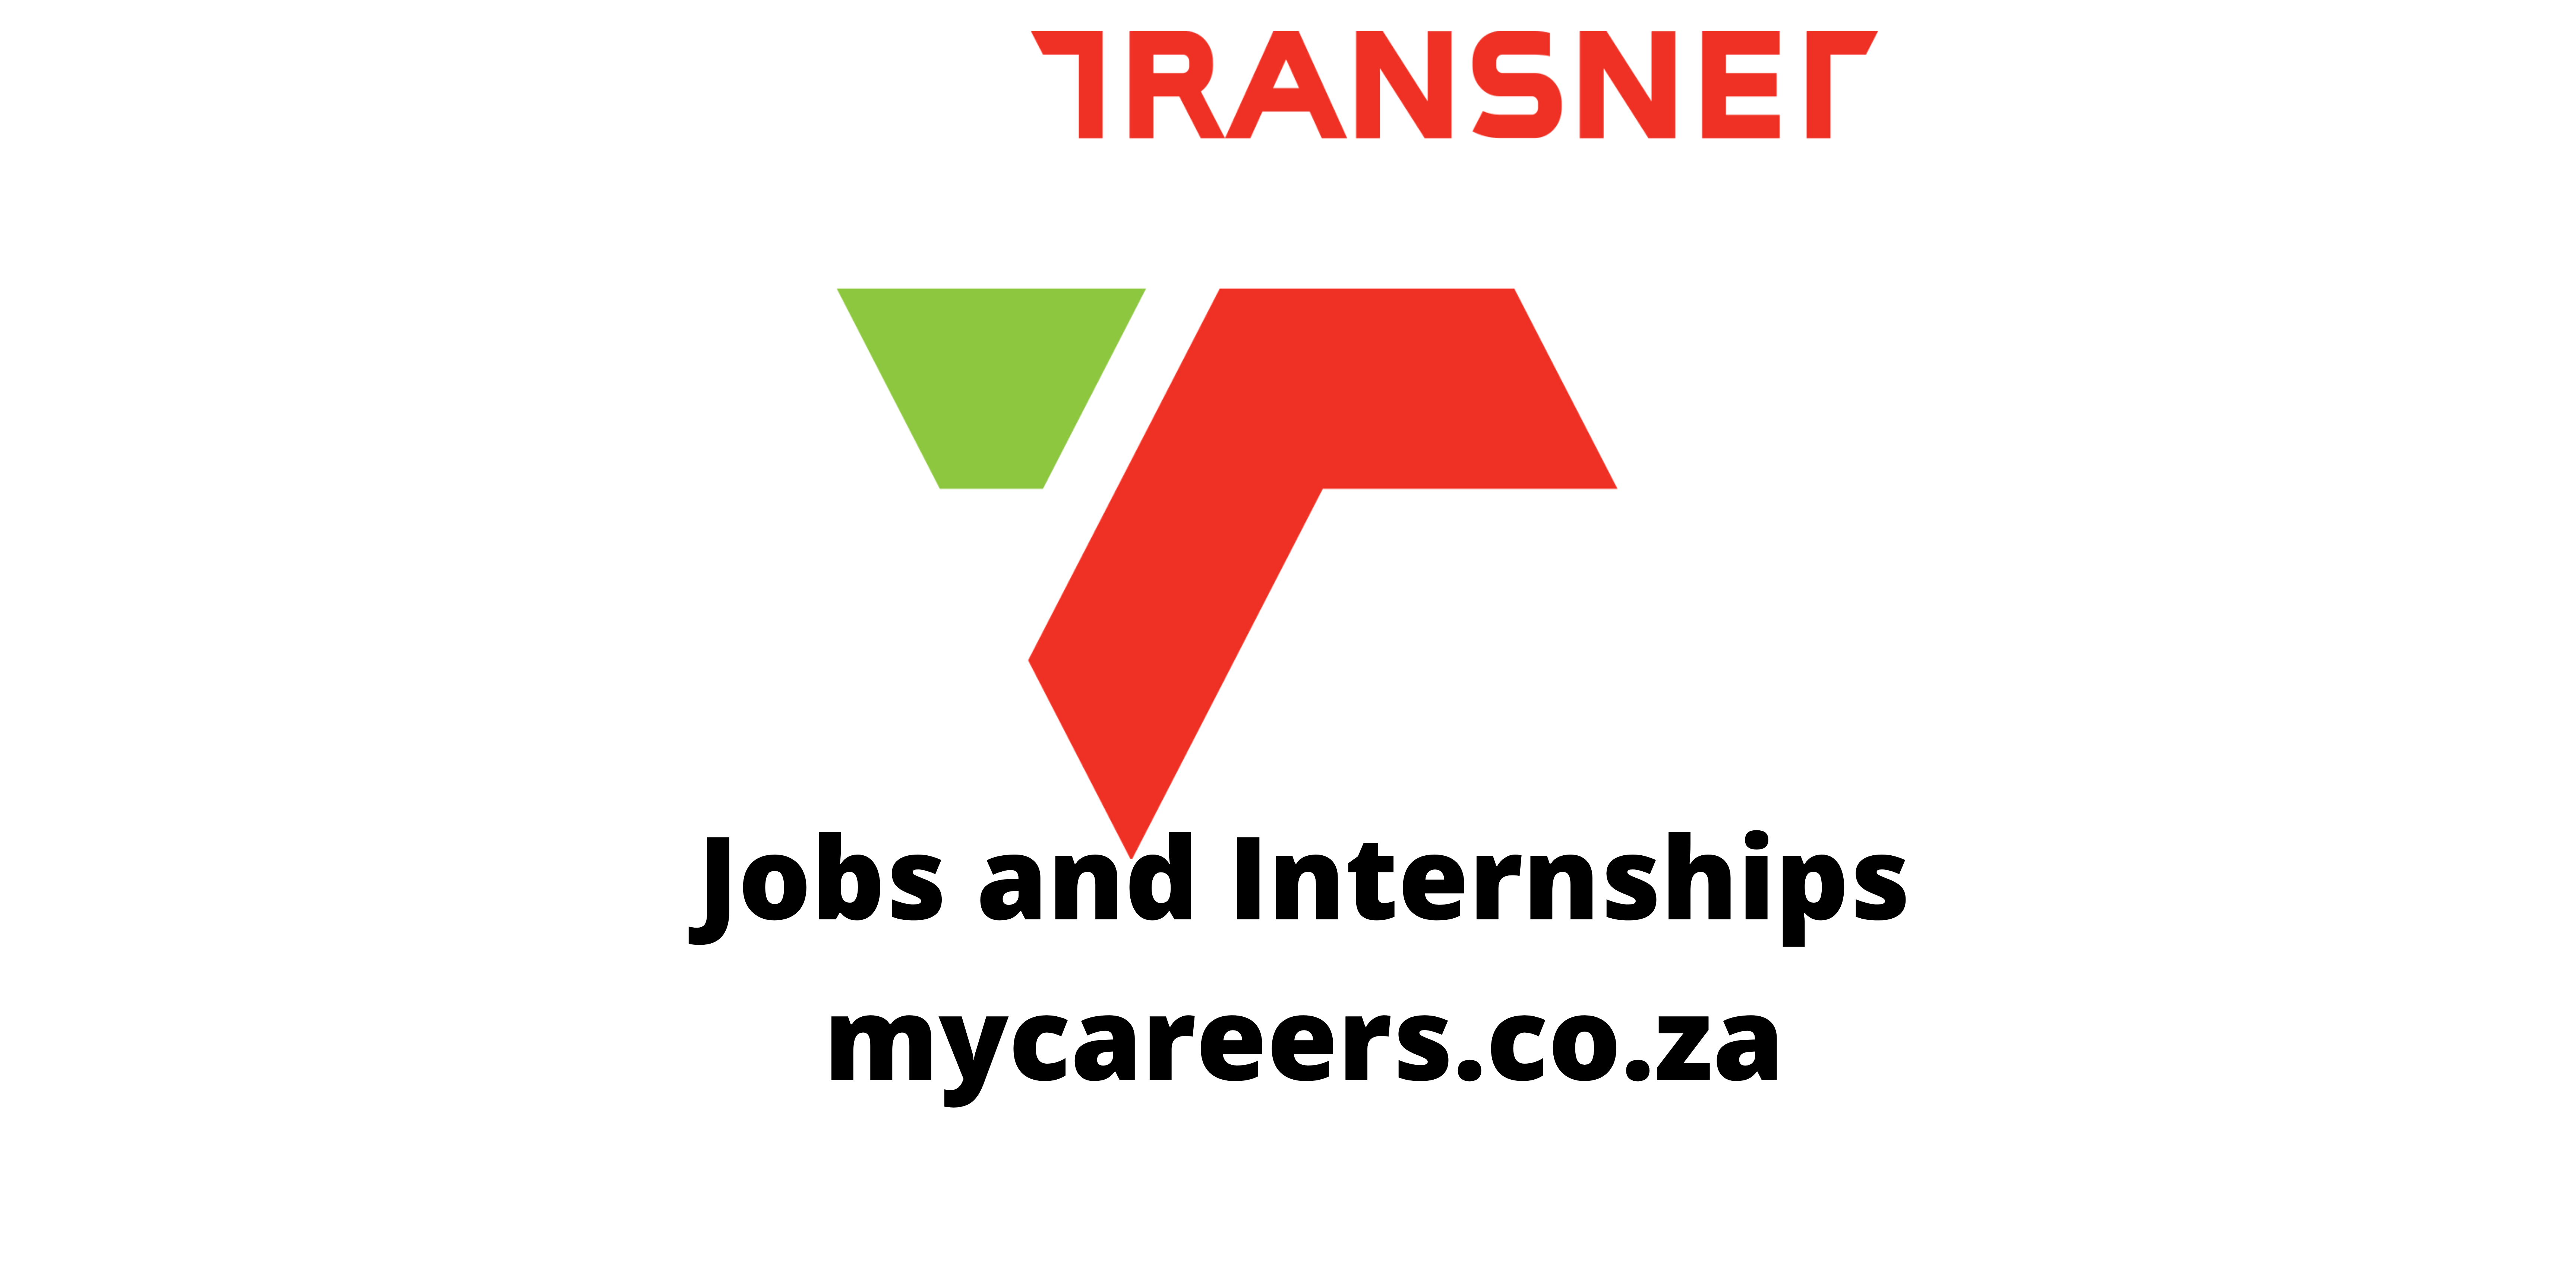 How to Apply Jobs and Leanerships Mycareers.co.za